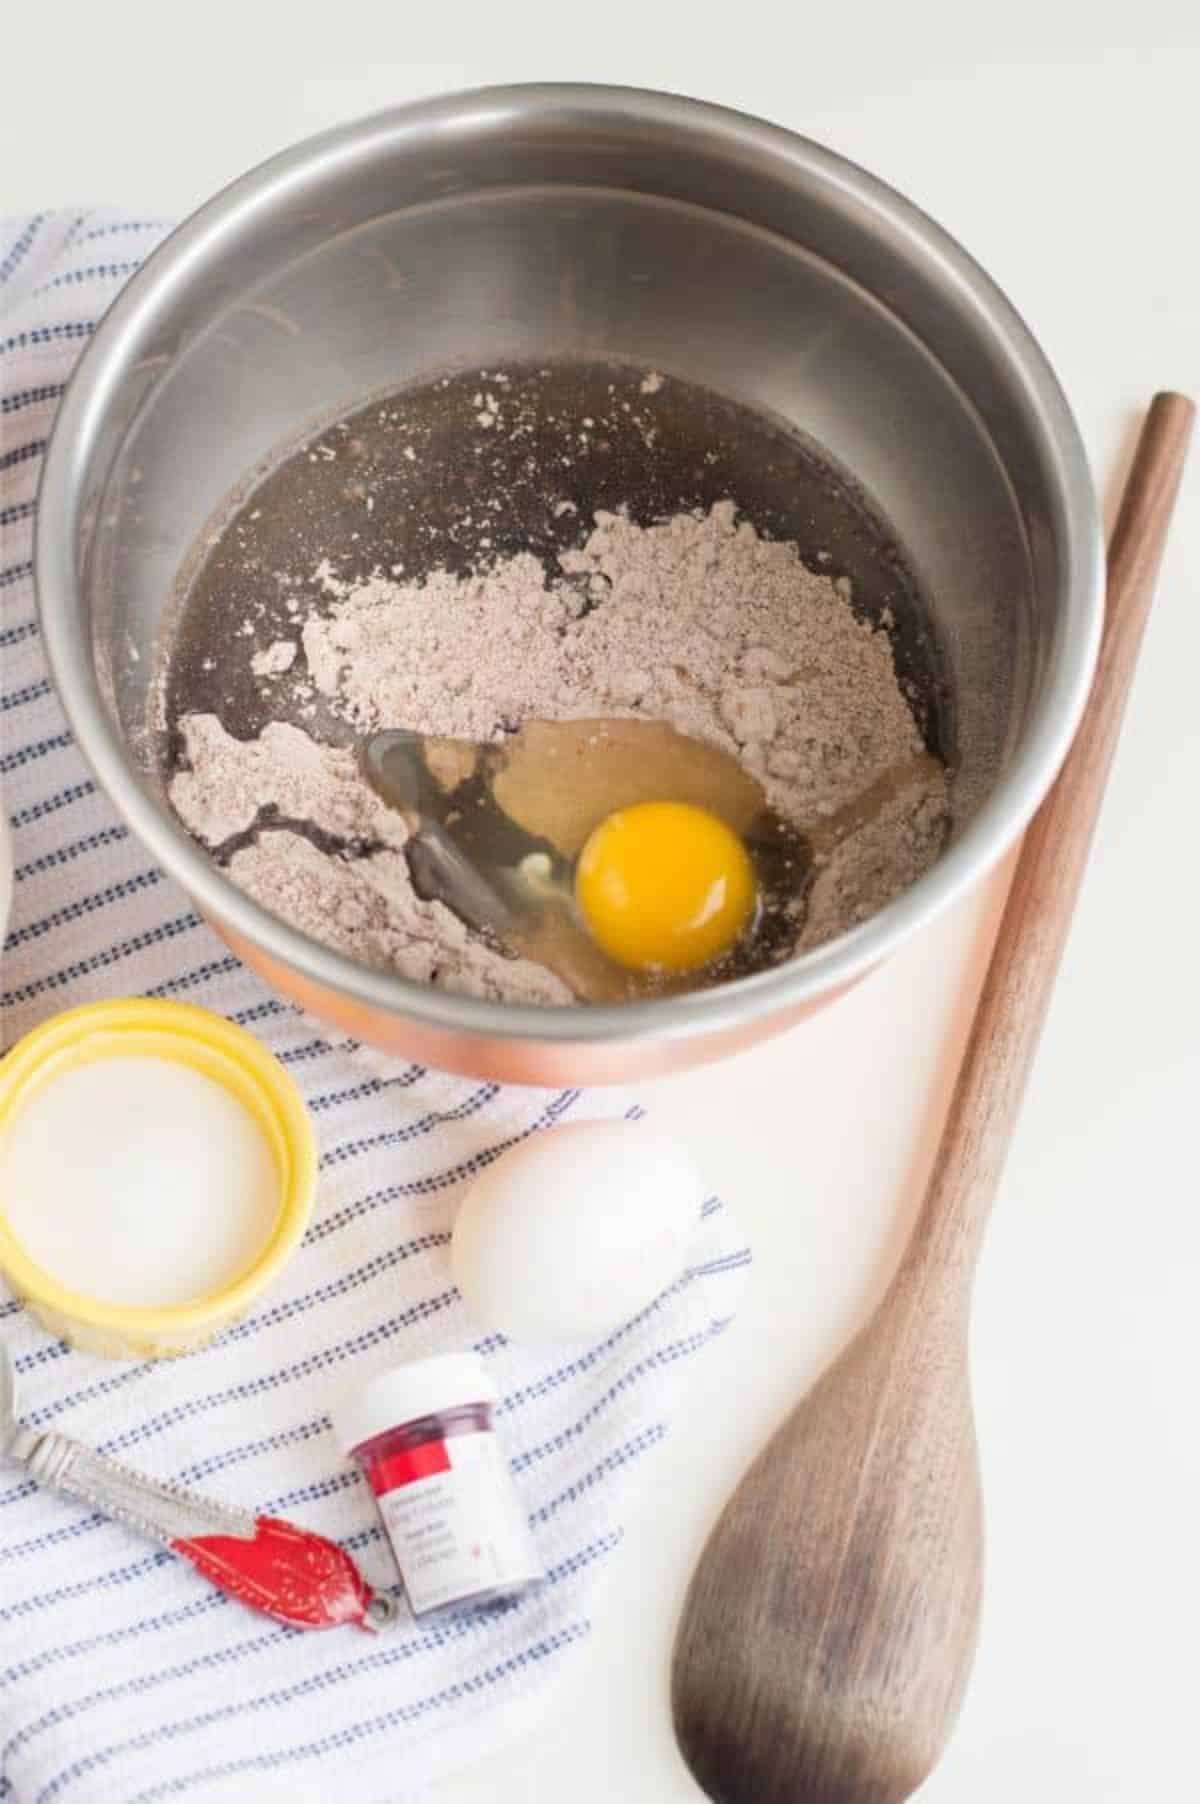 cake mix, oil and eggs in a mixing bowl next to a wooden spoon and other ingredients.